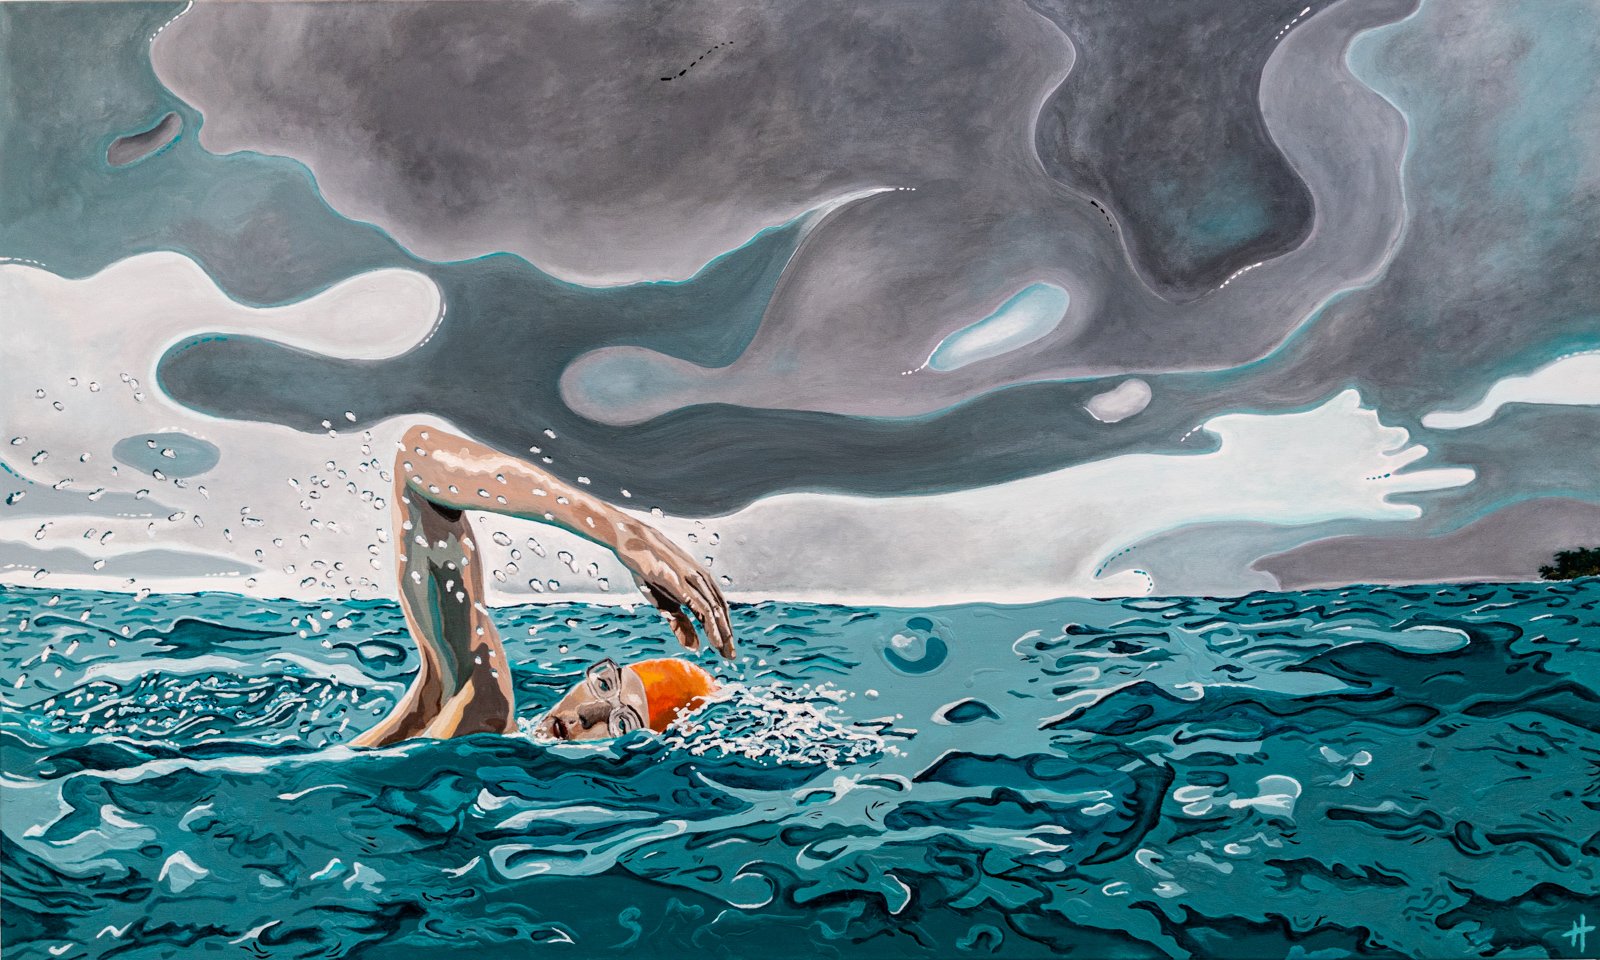 Heather Perry's underwater painting of the swimmer in a storm.